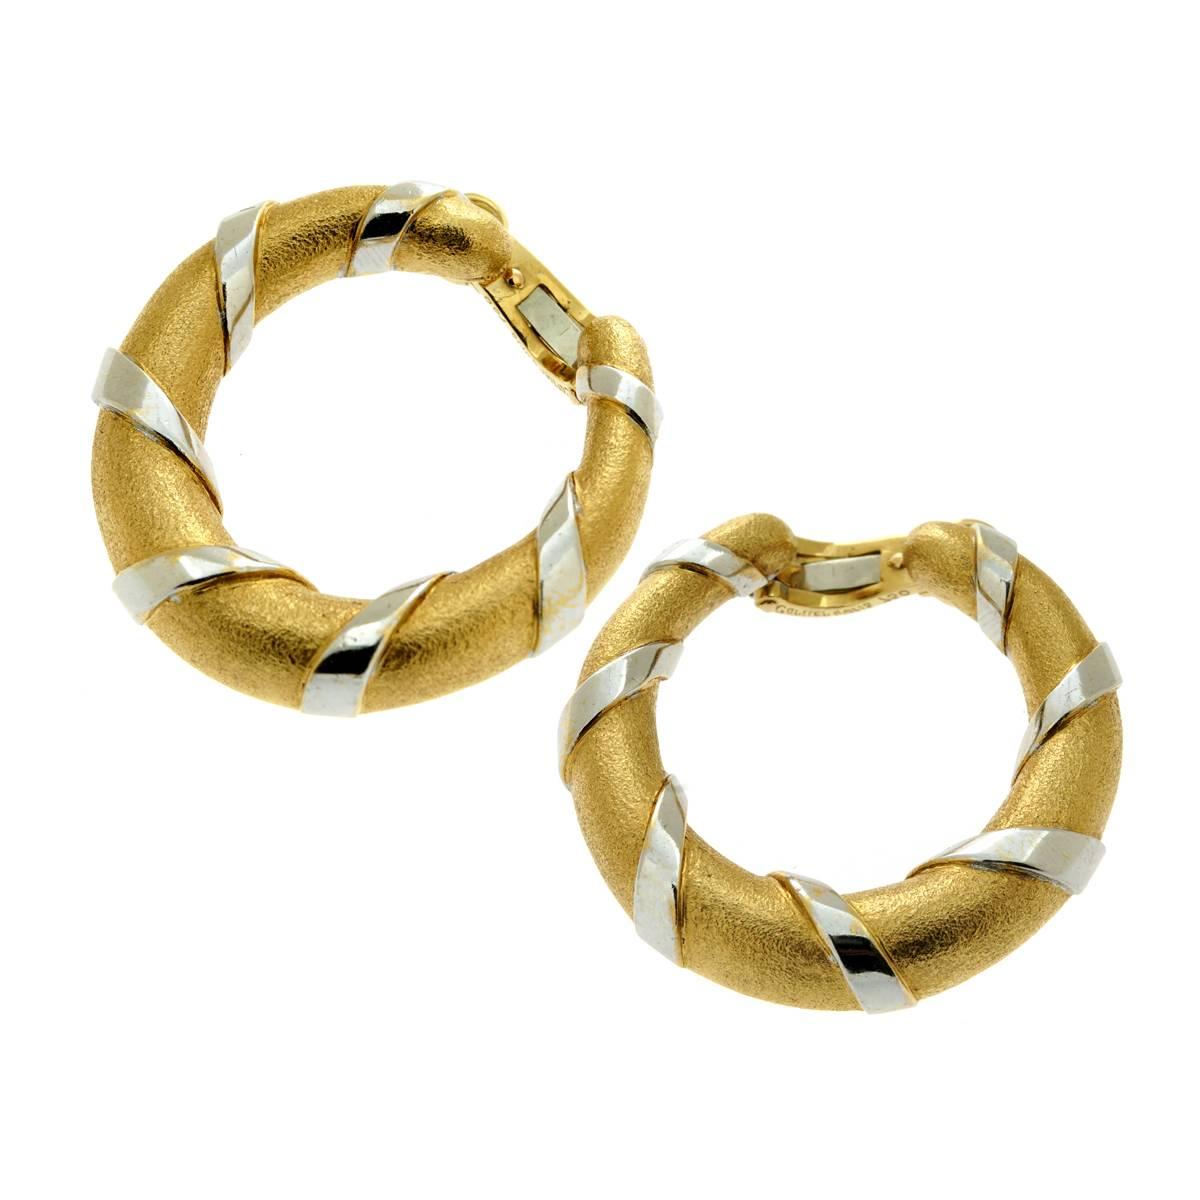 A fabulous pair of Cartier hoop earrings featuring a unique textured finish on the yellow gold followed by smooth 18k white gold ribbons for the perfect contrast.

The earrings measure 1.22